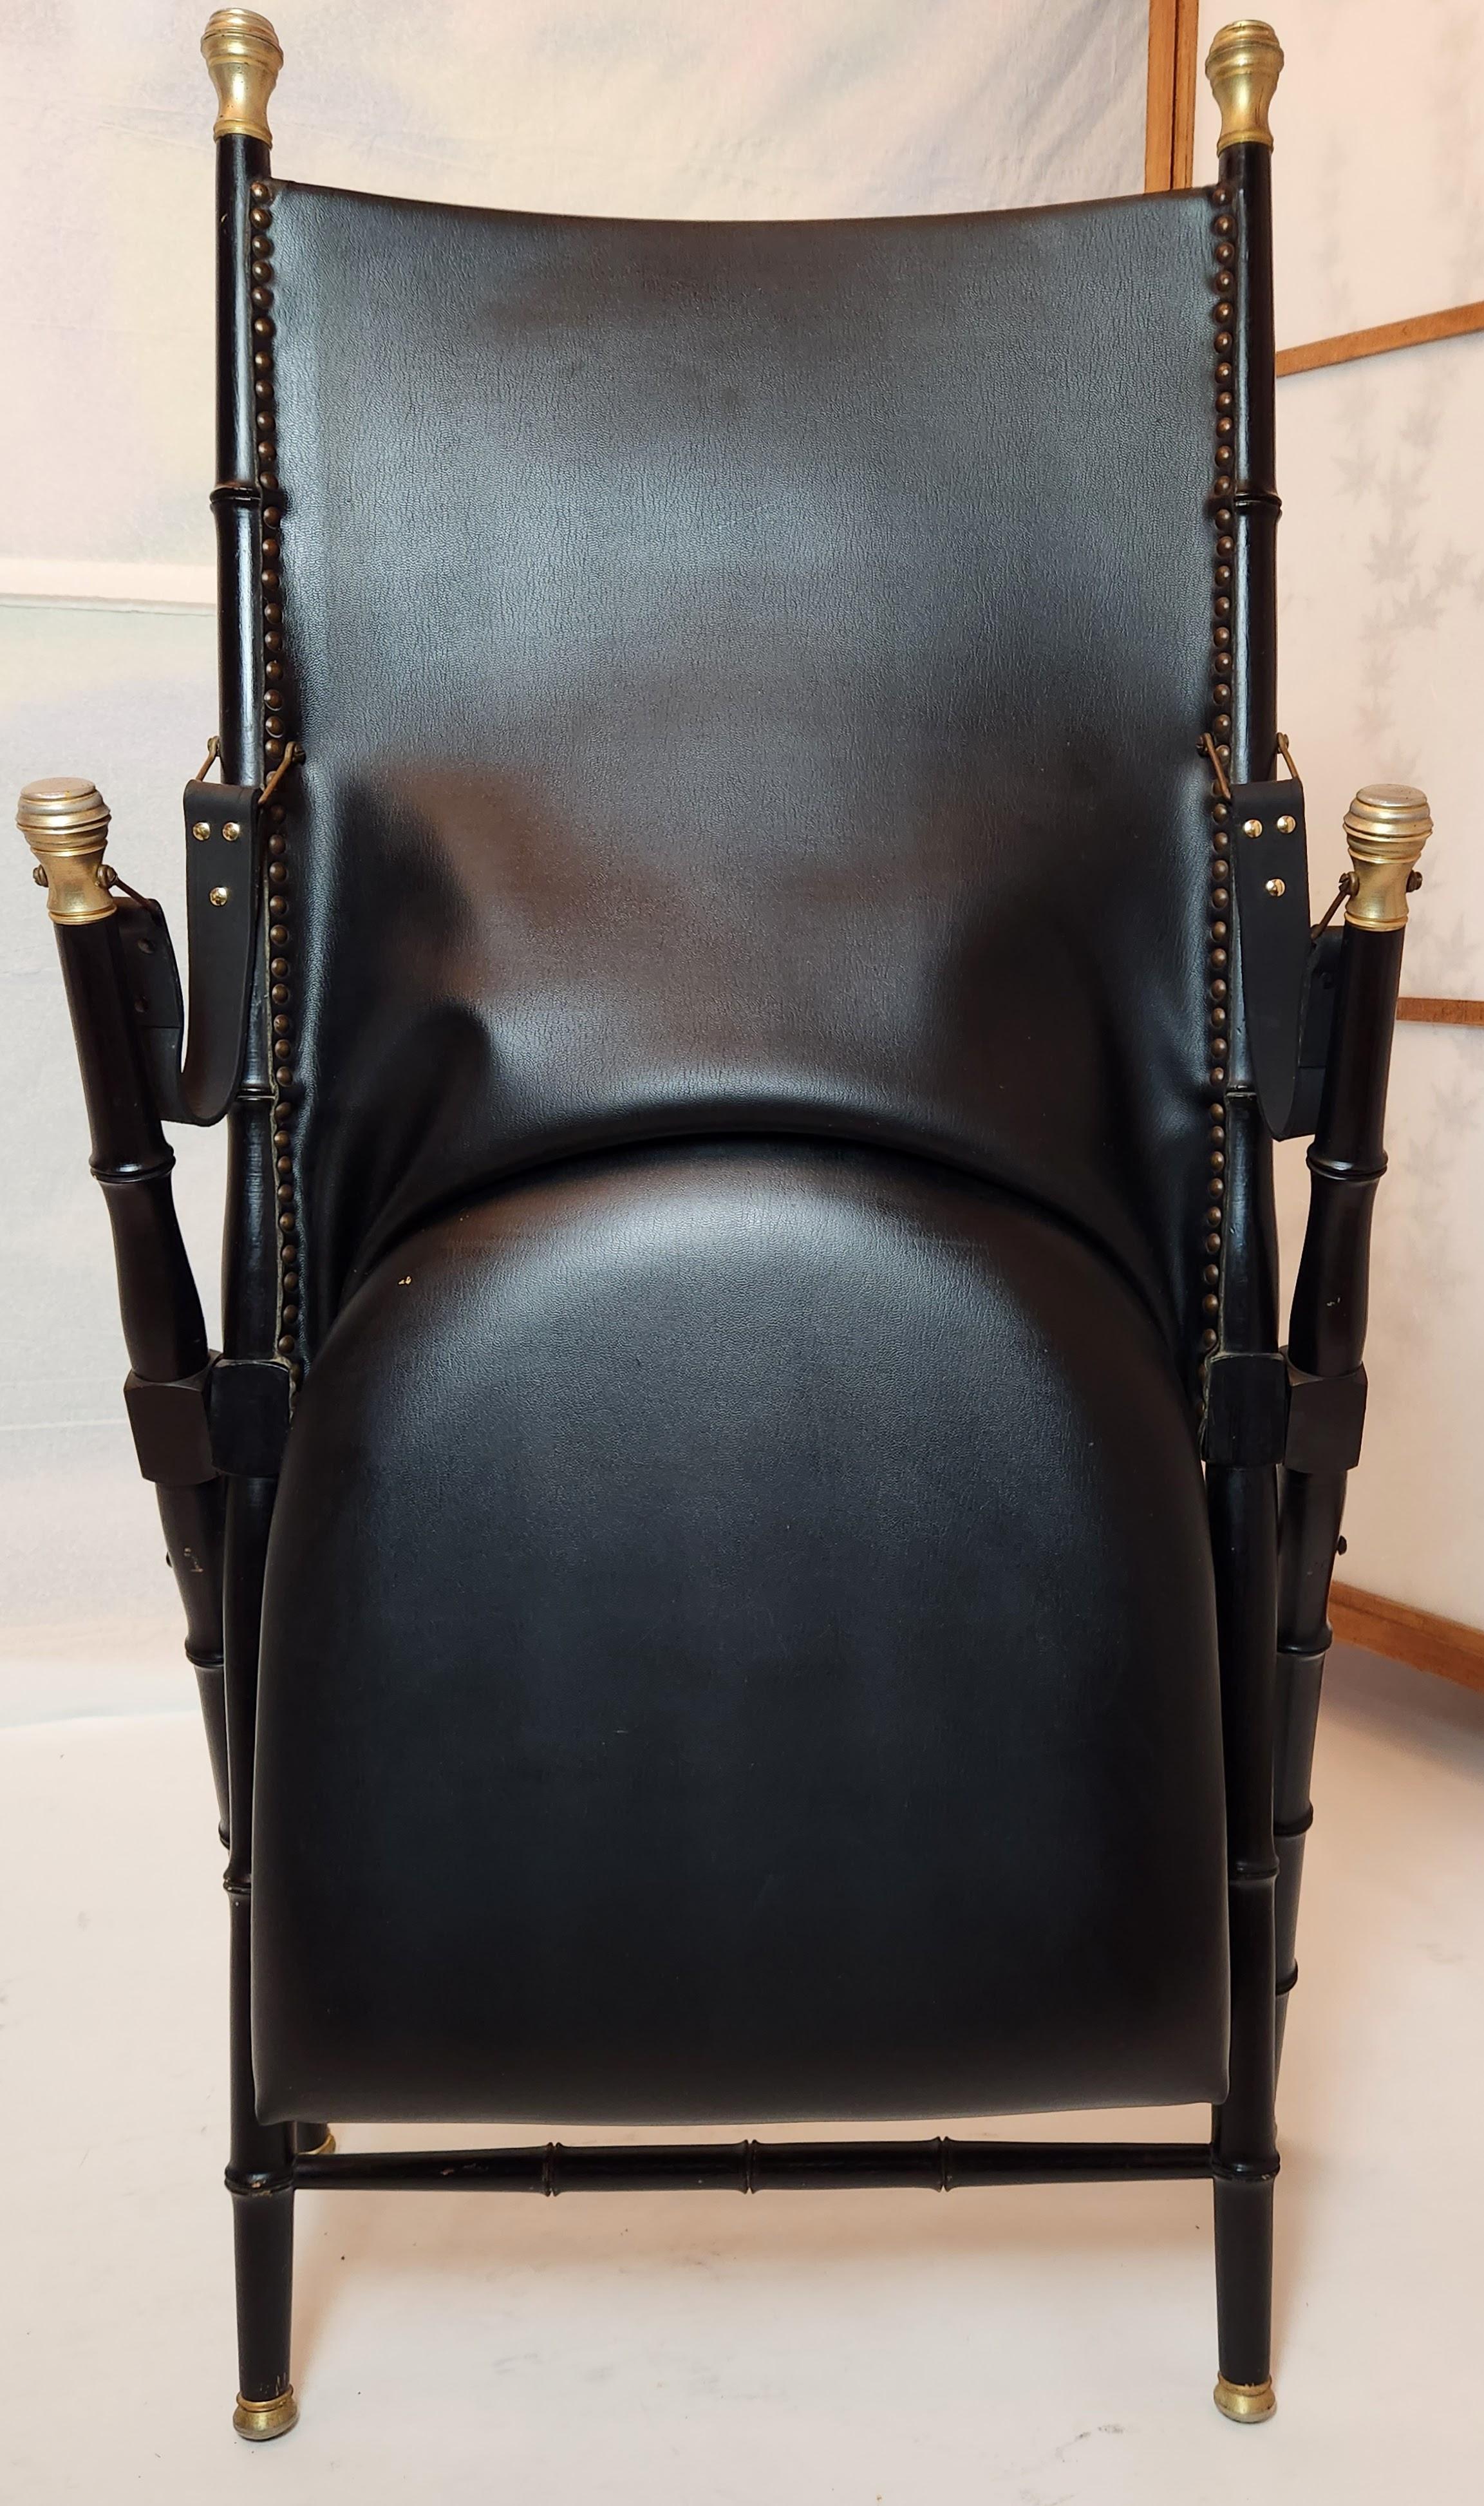 Carved Classic Italian Folding Campaign Chair in Black Leather, C. 1965 For Sale